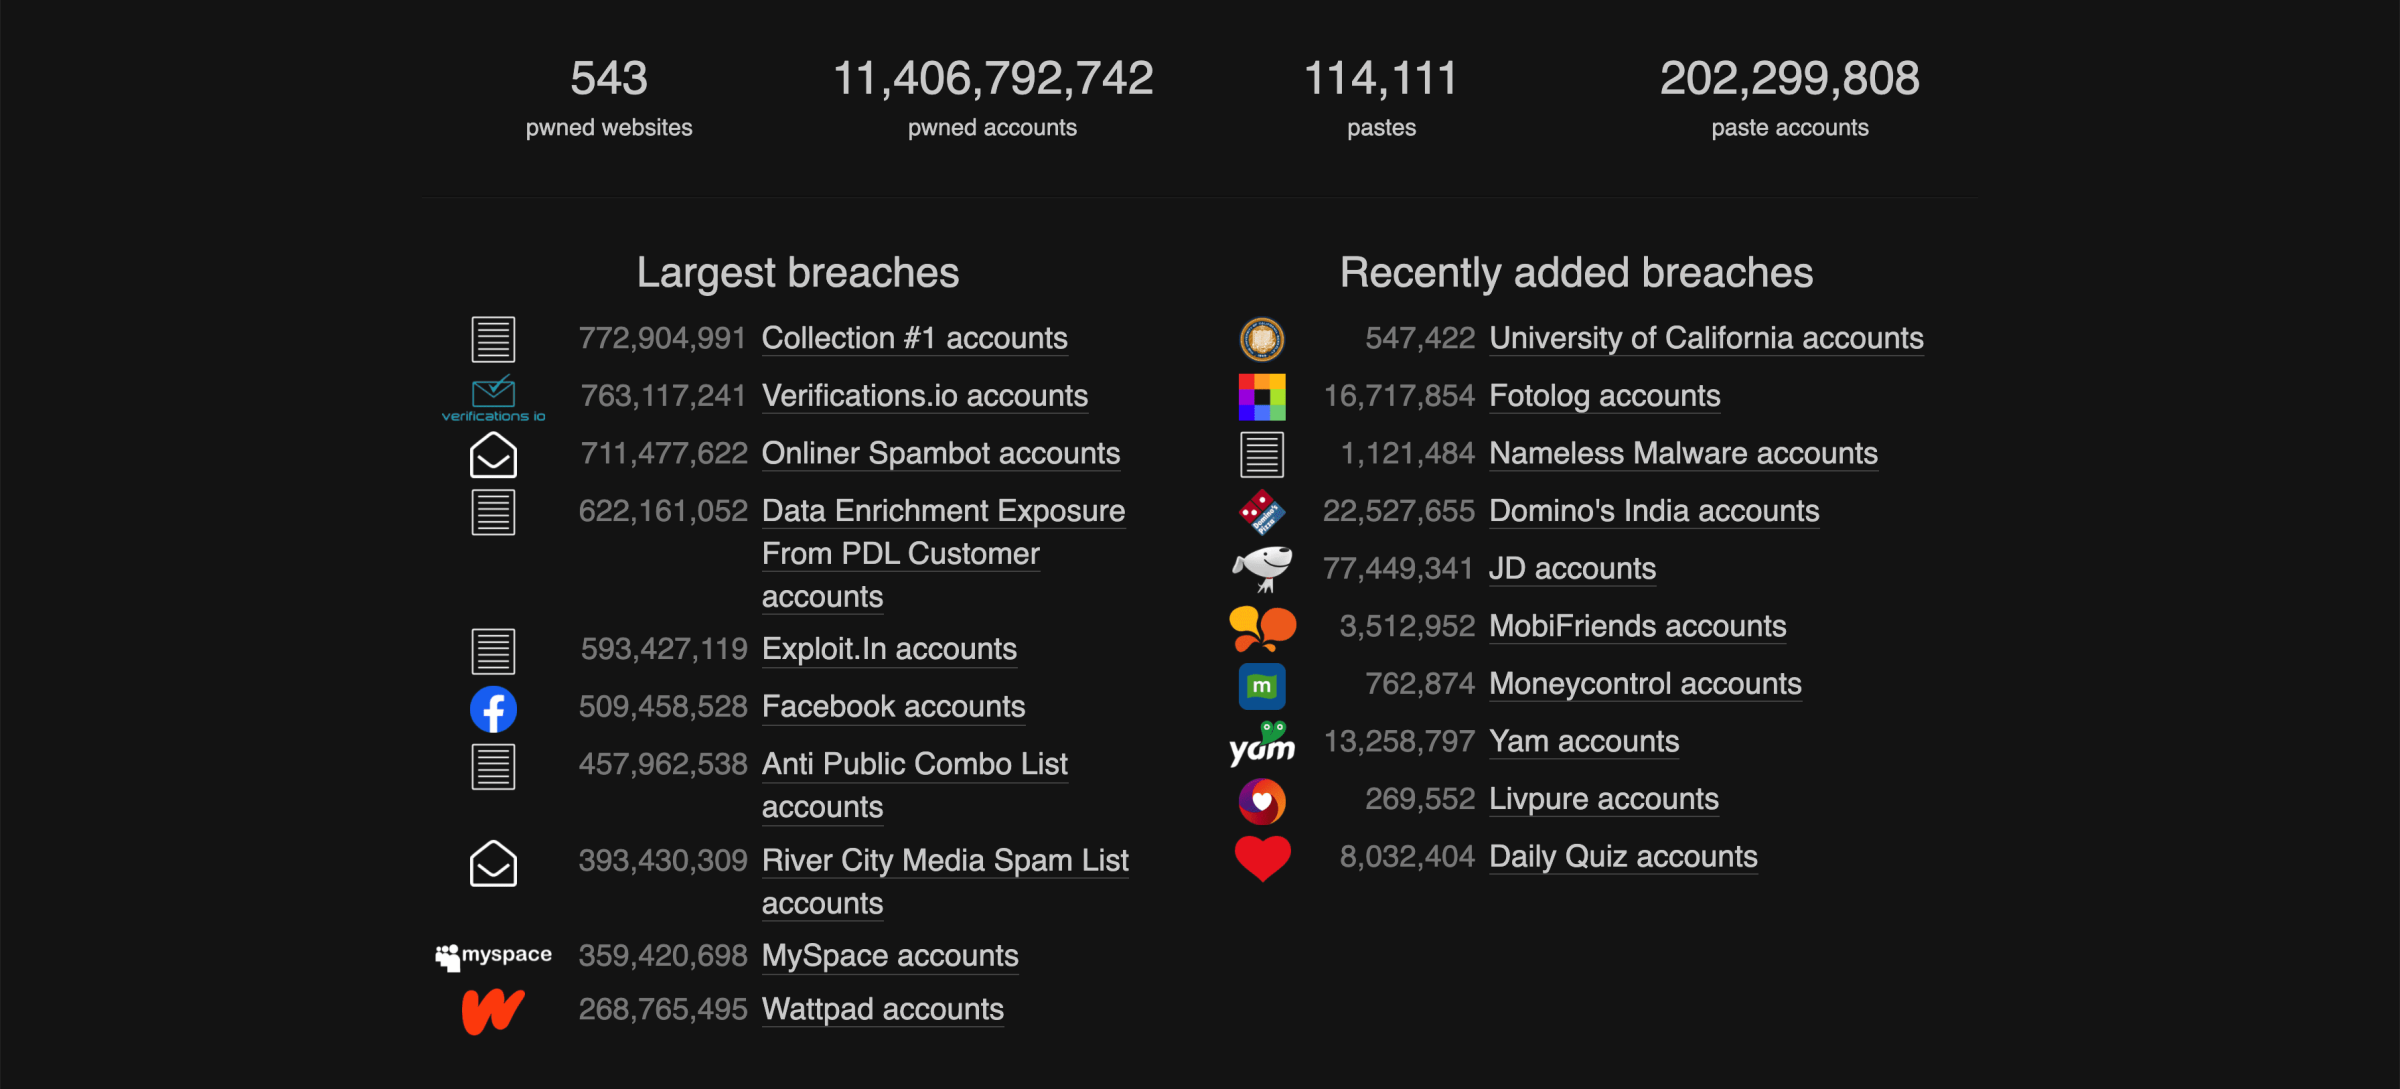 A black screen shows four numbers across the top: 543 pwned websites, 11,406,792,742 pwned accounts, 114,111 pastes, 202,299,808 paste accounts. Under these are two columns: One with the 10 largest breaches, one with 10 of the most recently added breaches